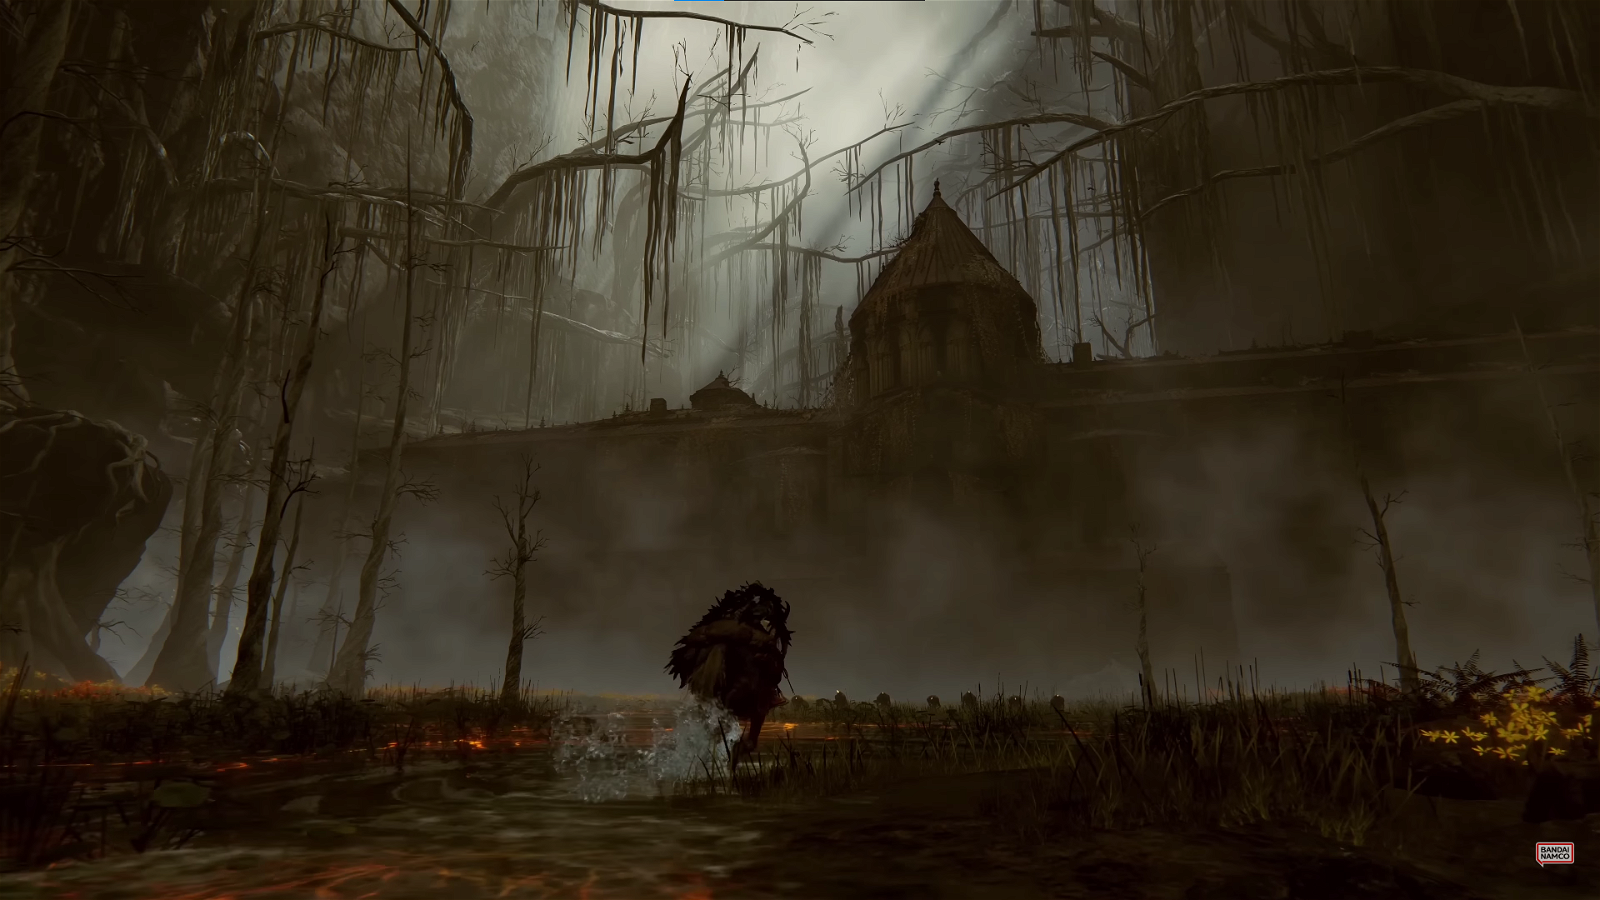 Poisoned Swamps teased in the DLC gameplay trailer